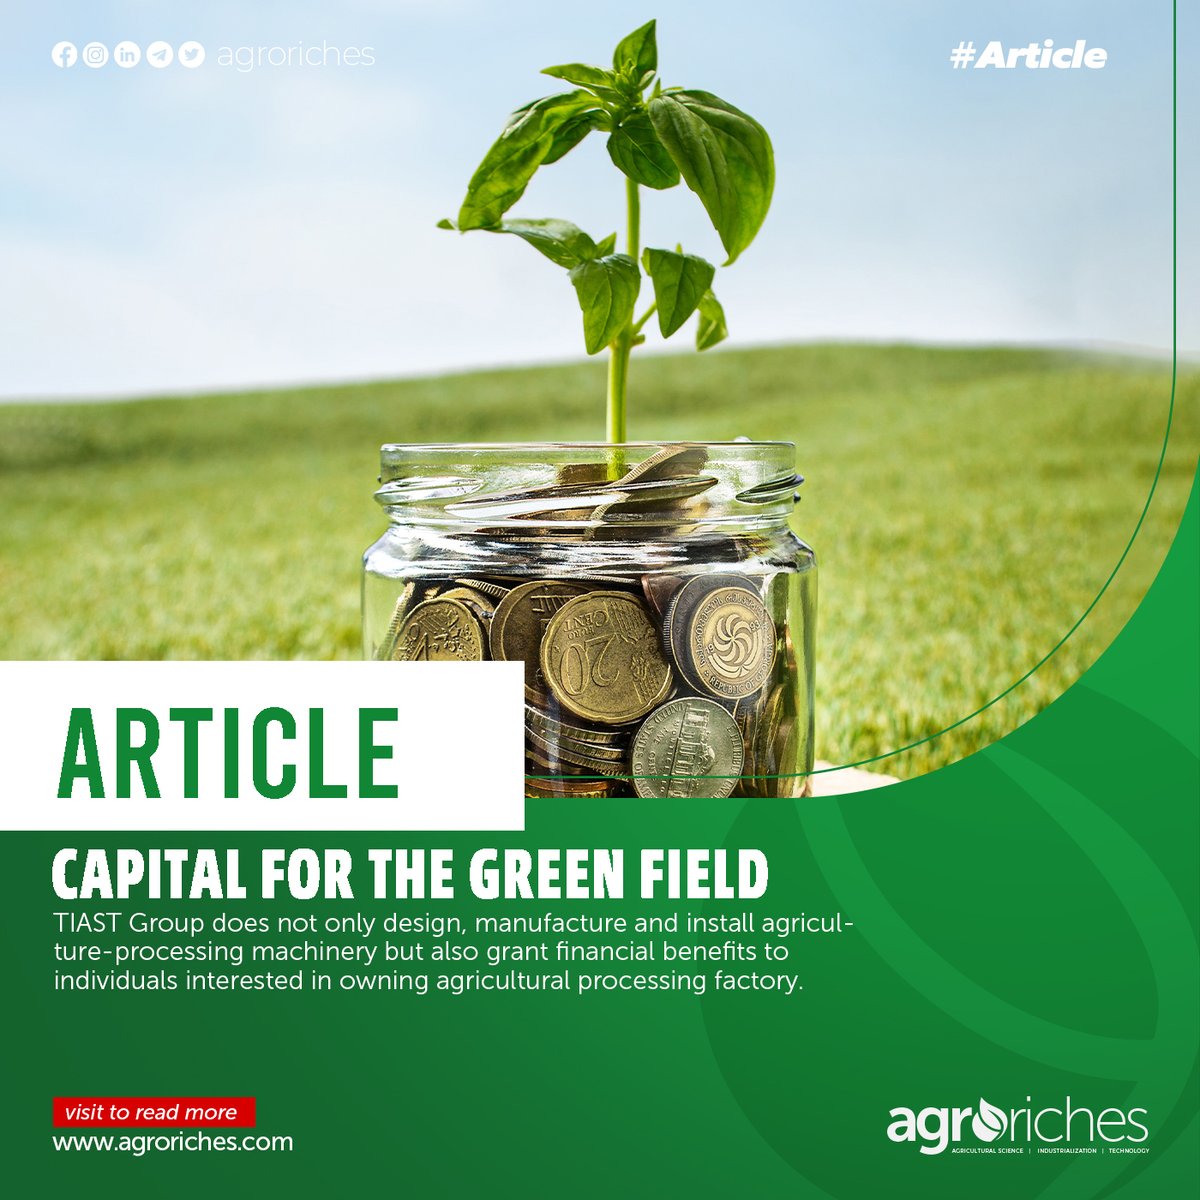 Capital for the green field.
Visit our website, agroriches.com to read more.

#agroriches #agriculturaltrends #agriculturenews #african #women #agricultureinghana #ghana #articles #farming #growth #food #agriculture #technology